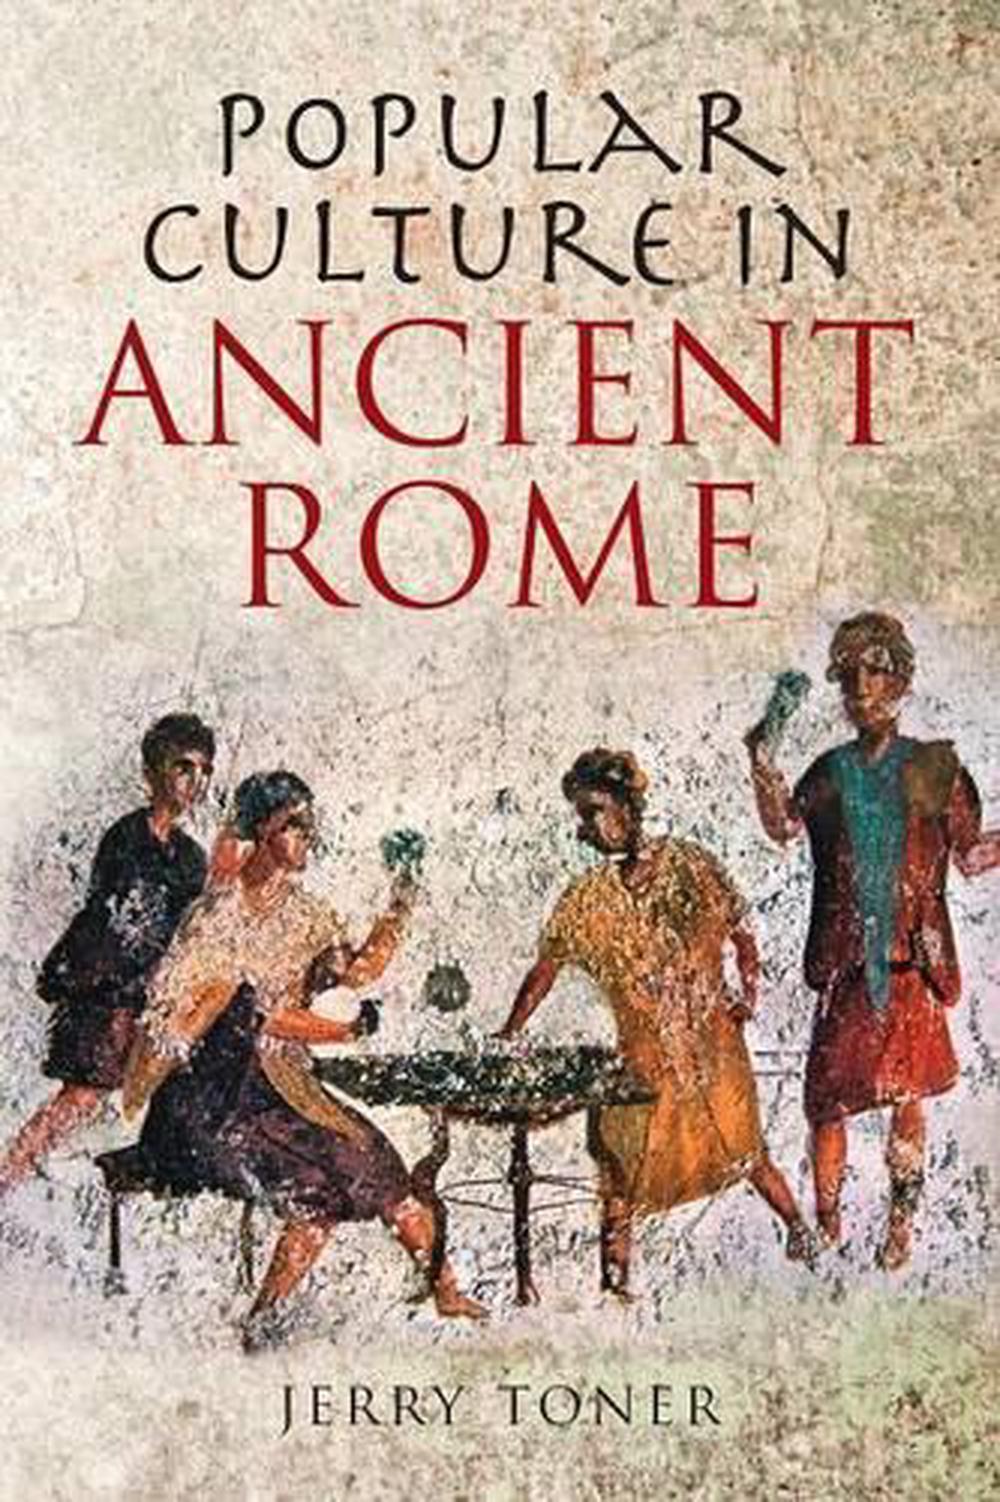 Popular Culture in Ancient Rome by Jerry Toner (English) Paperback Book ...